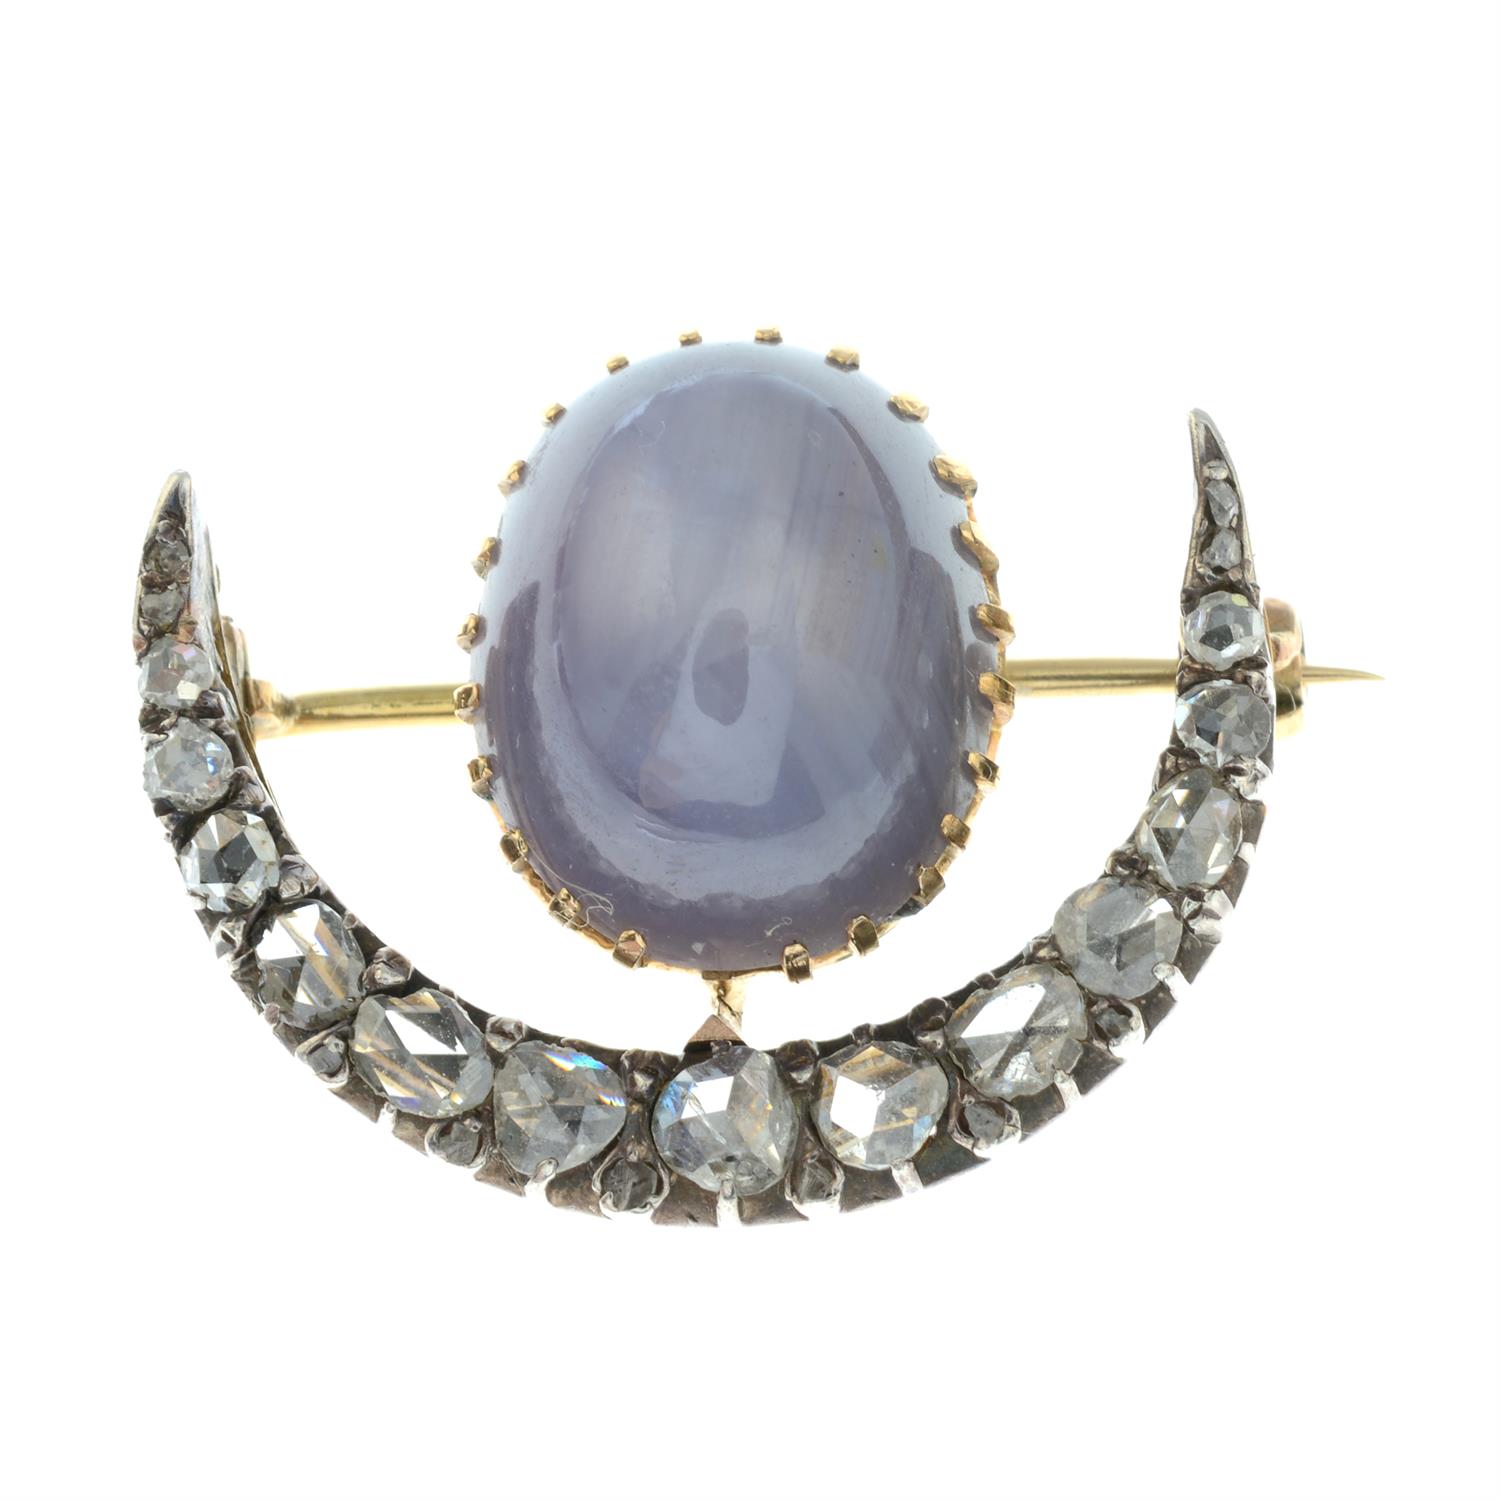 A late 19th century silver and gold rose-cut diamond crescent brooch, with star sapphire cabochon - Image 2 of 4